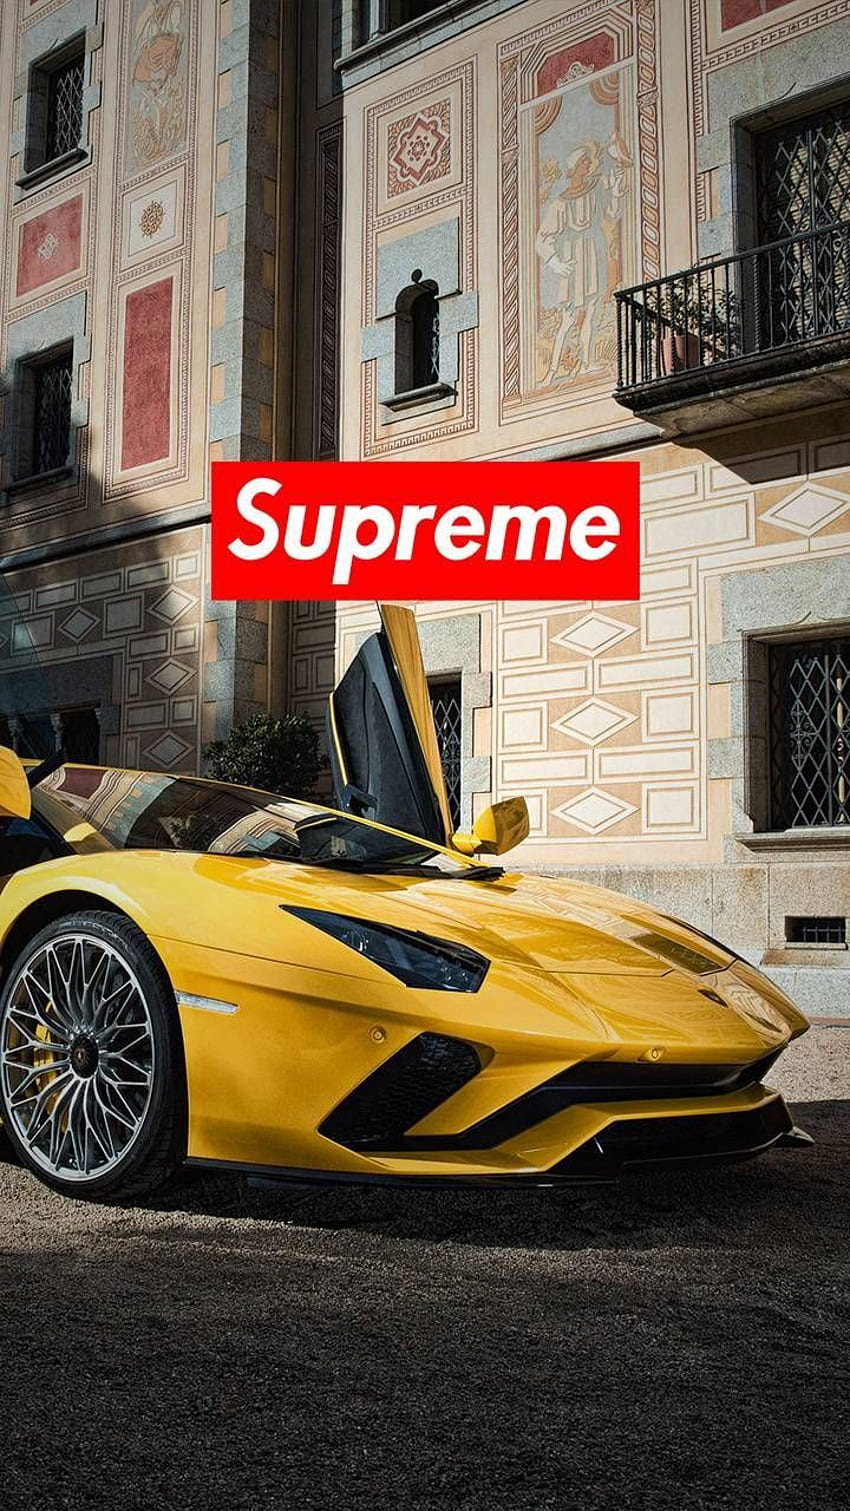 Download Supreme car wallpaper by SrCots now. Browse millions of popular auto  wallpapers and ringtones on Zedge…